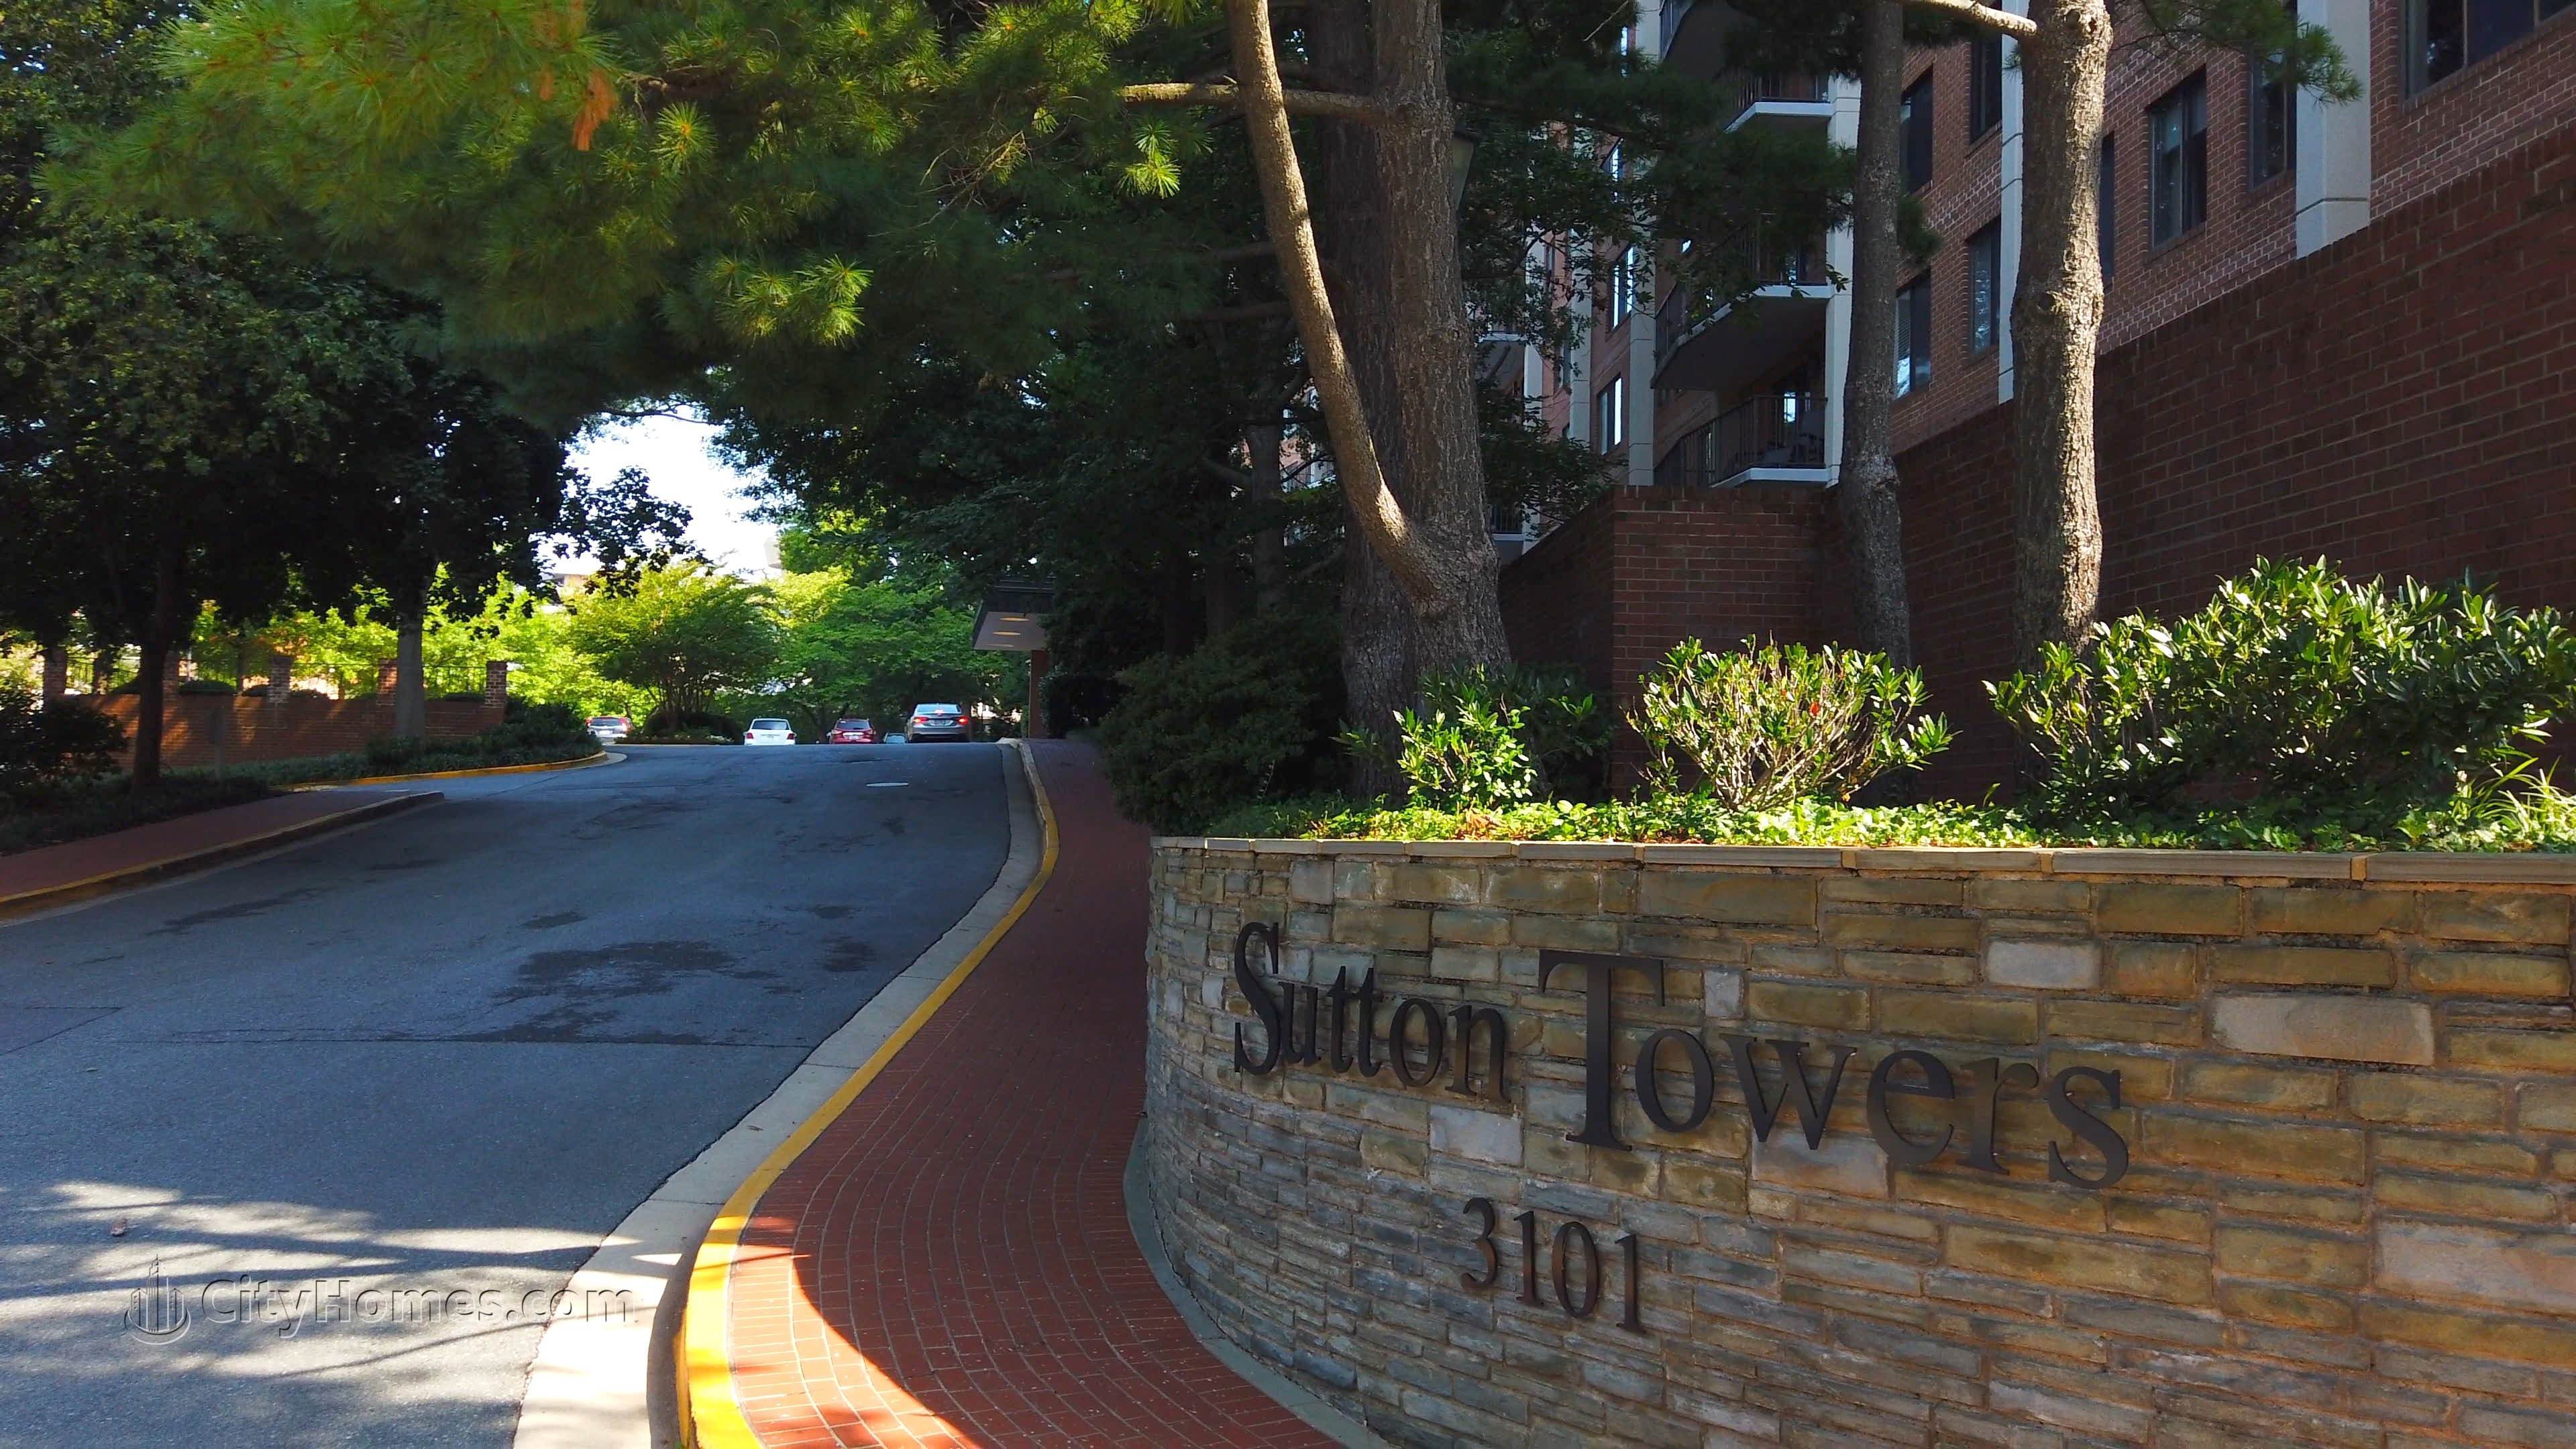 Sutton Towers建於 3101 New Mexico Ave NW, Wesley Heights, Washington, DC 20016